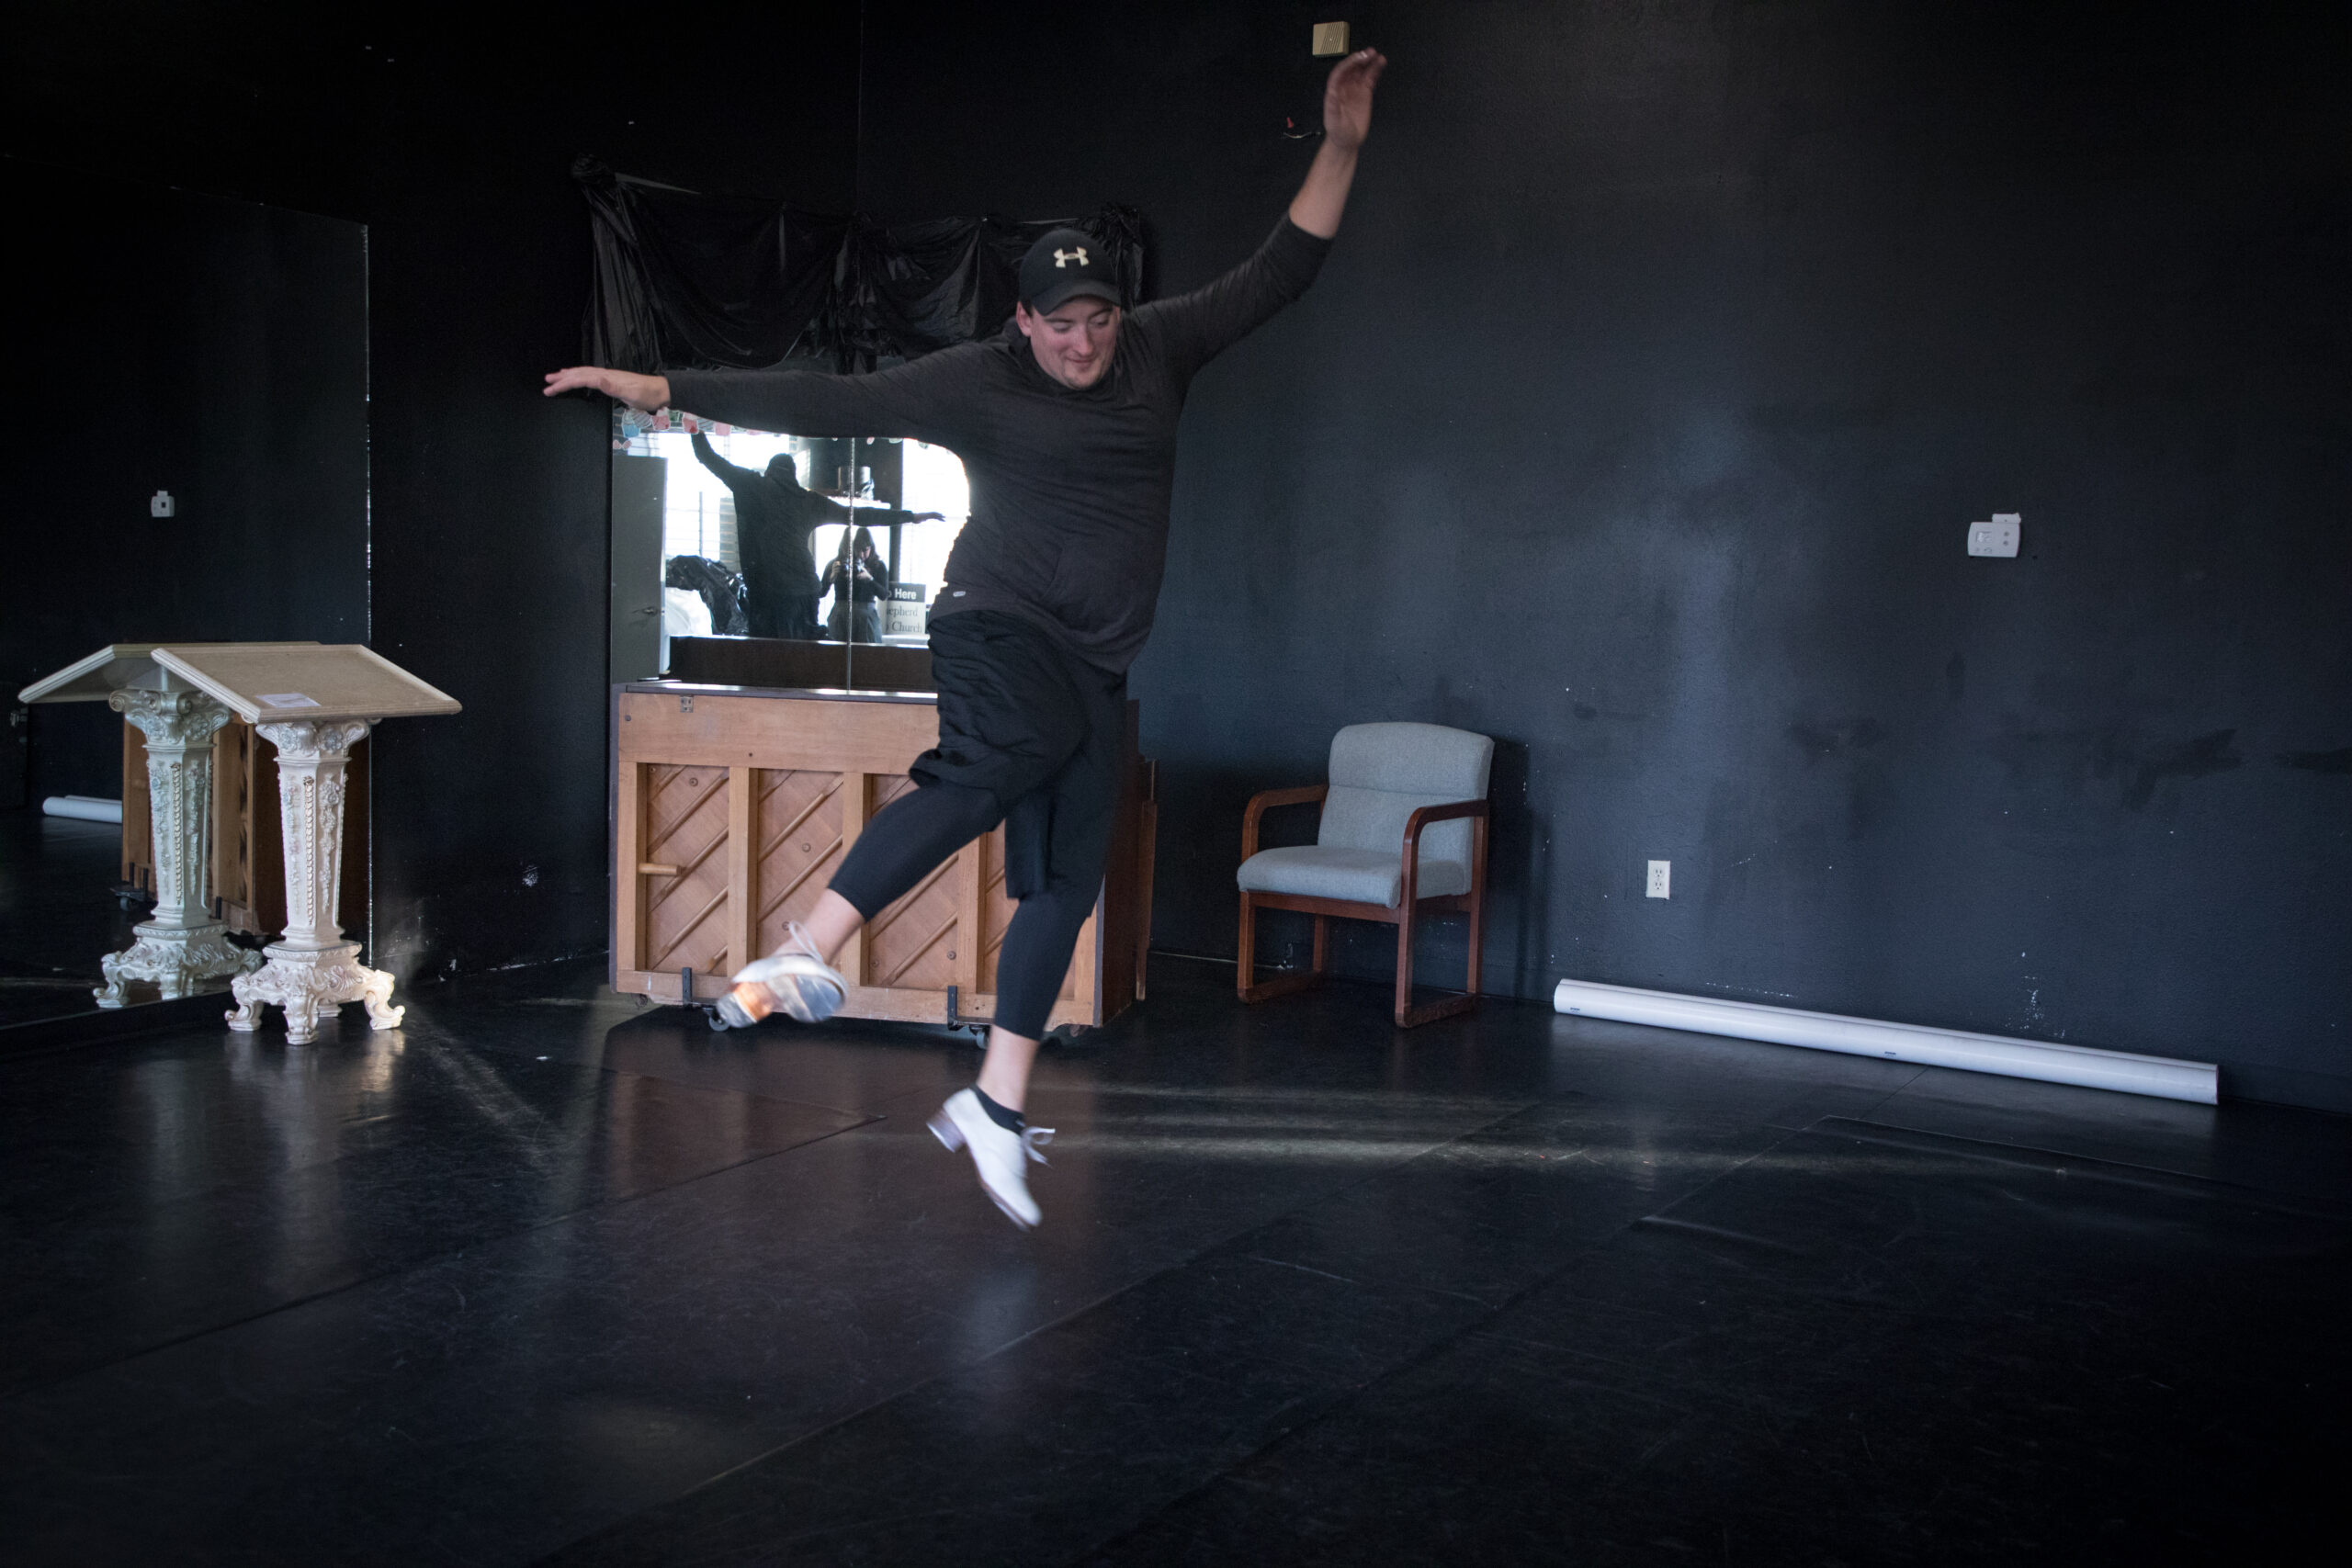 Josh Nixon is mid-air in the middle of a room at Raskin Dance Studio. His arms are up over his head, and his legs are in motion after performing a heel click, wearing his white tap shoes.